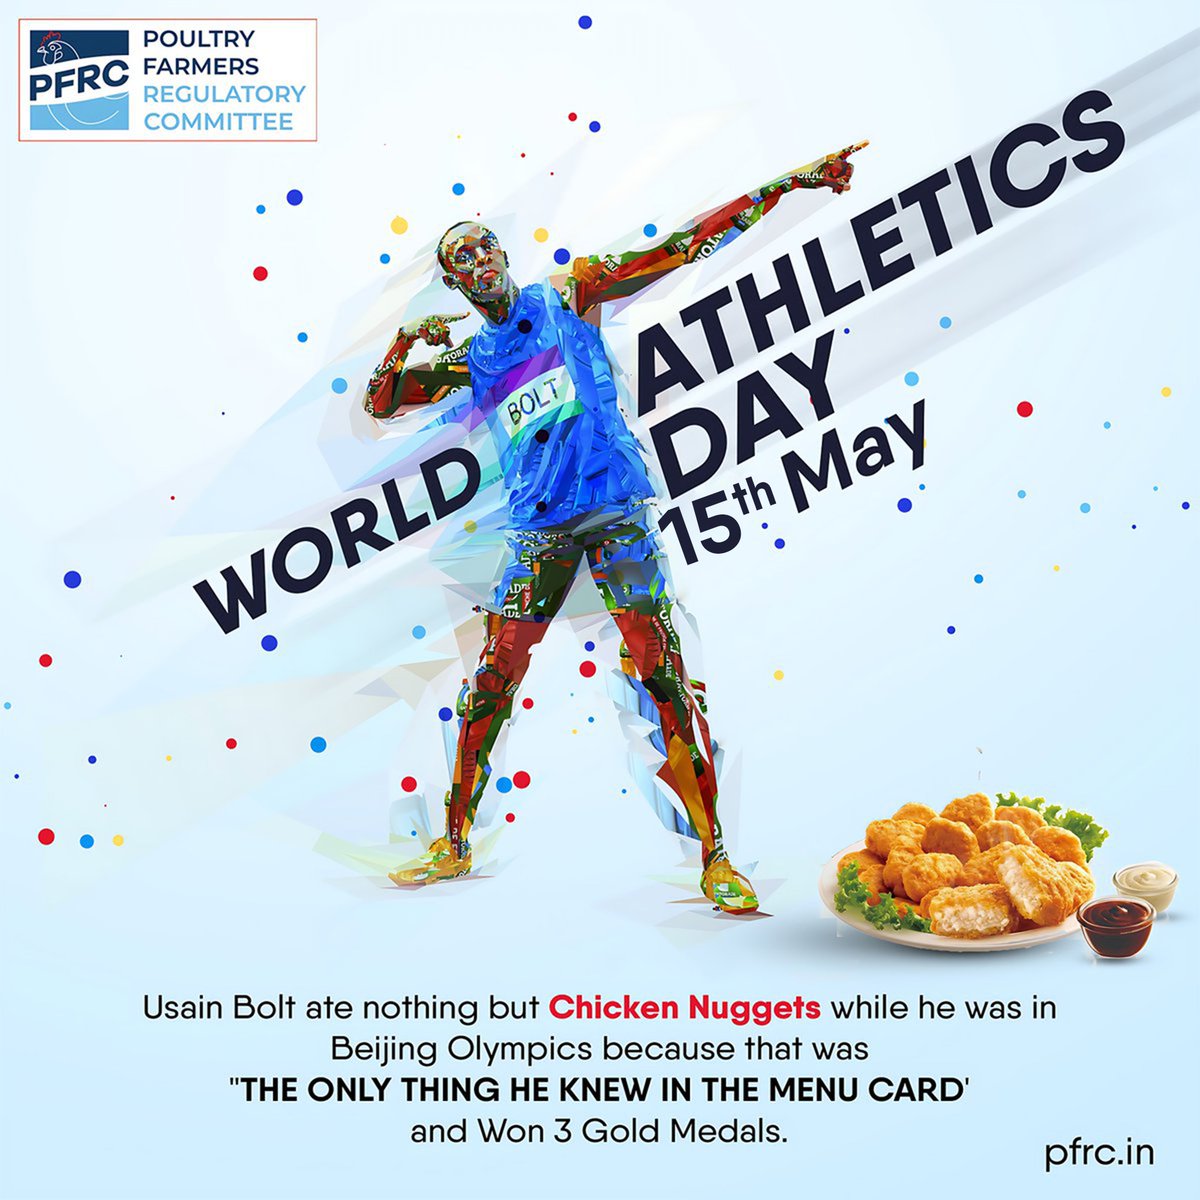 Eating Chicken will give strength for Athletes to play well.

PFRC Wishes you World Athletics Day!!!

#athleticsday #worldathleticsday #healthyliving #athleticsforlife #exercisemotivation #PFRC #PFRCTN